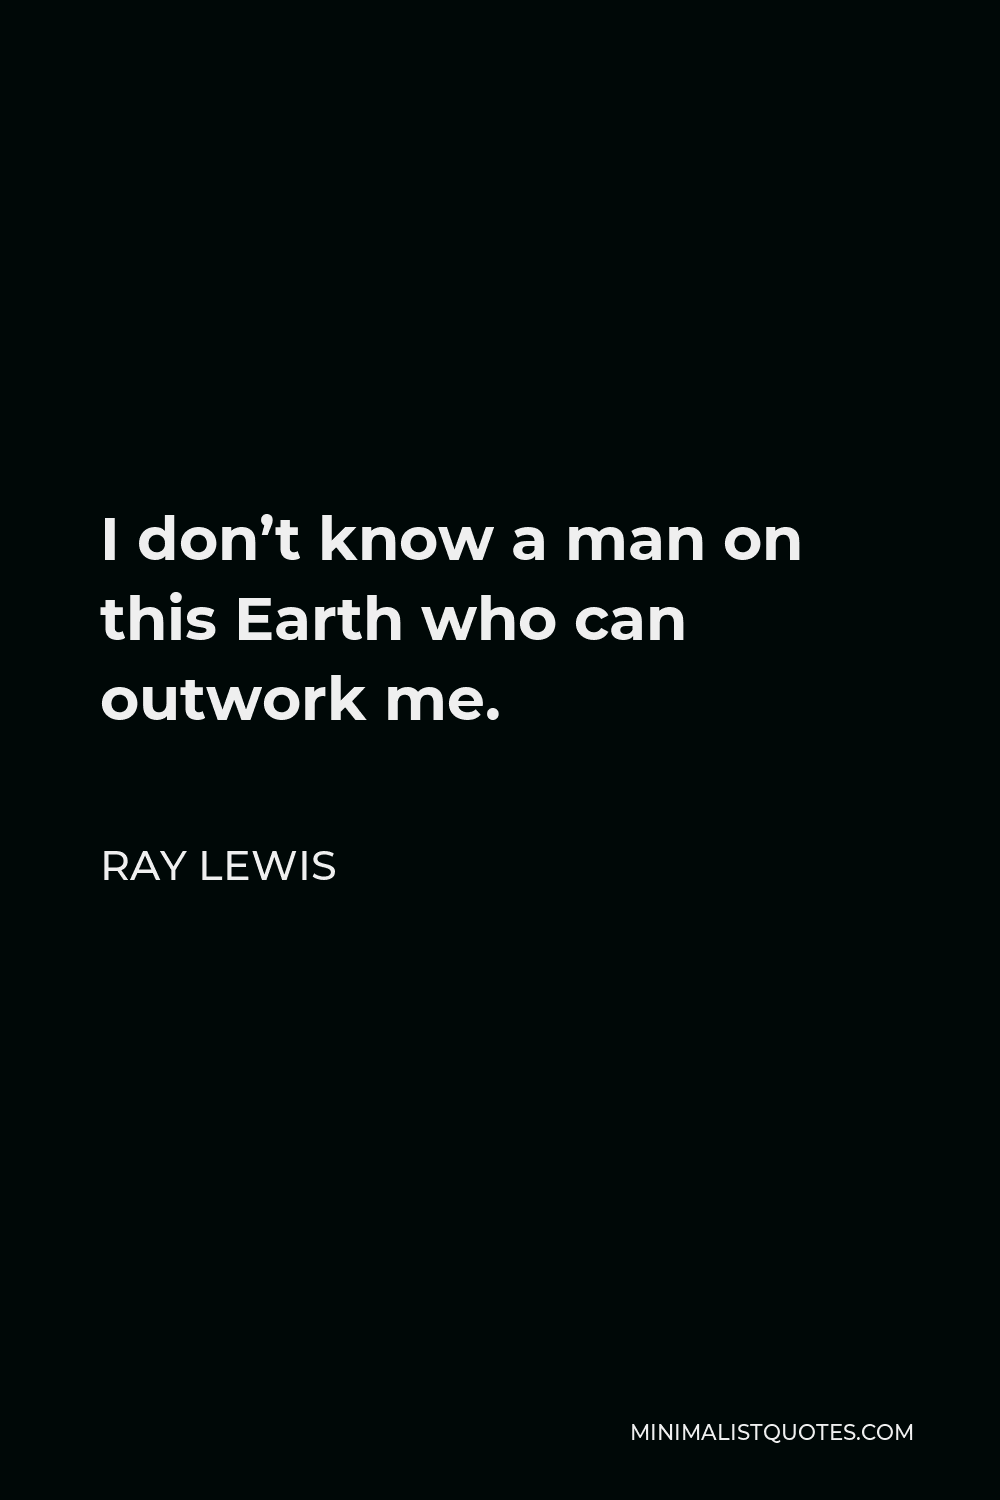 Ray Lewis Quote - I don’t know a man on this Earth who can outwork me.